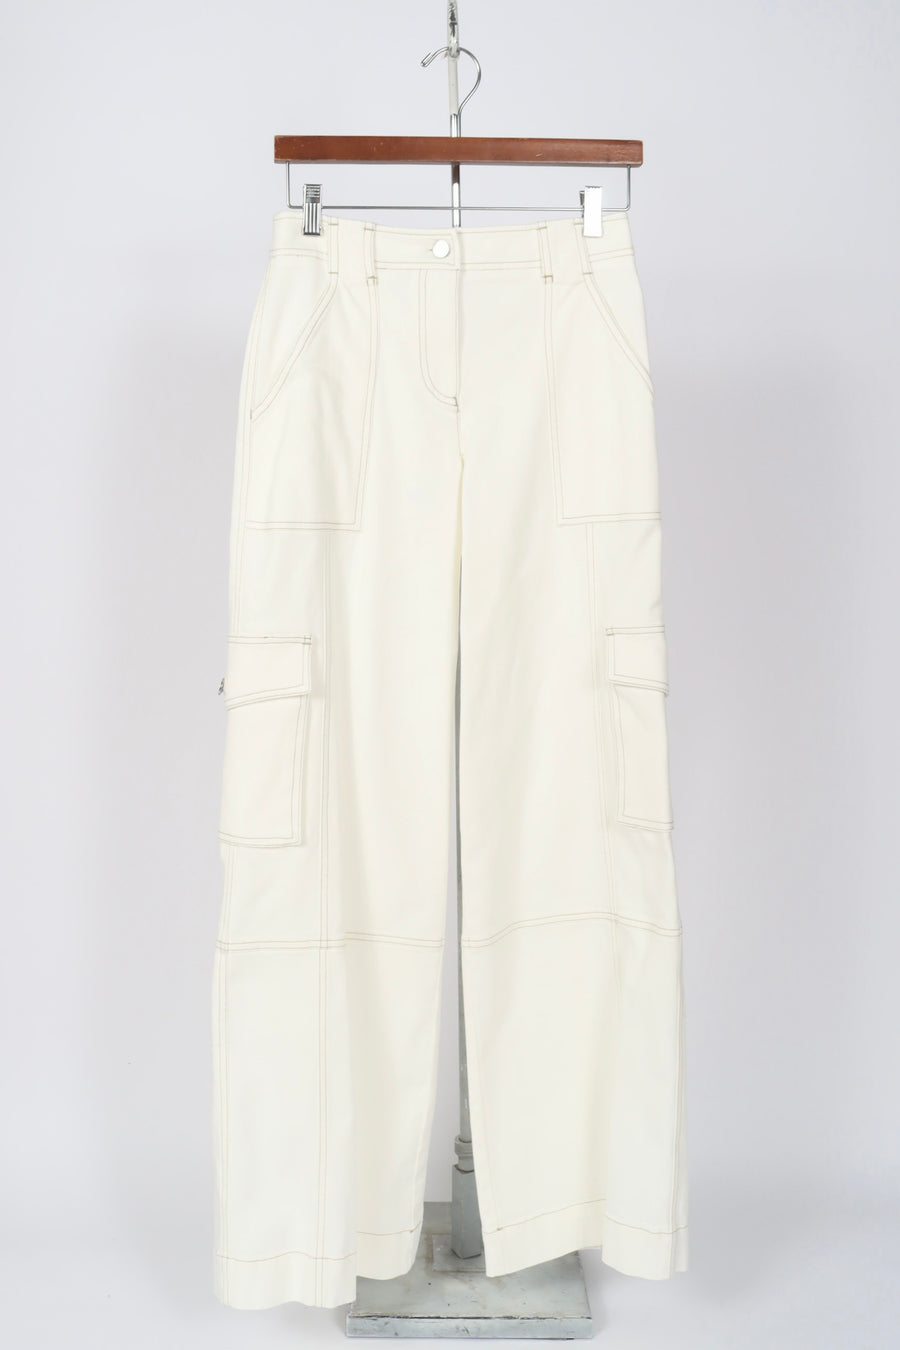 Coop with Cargo Pockets - Ivory